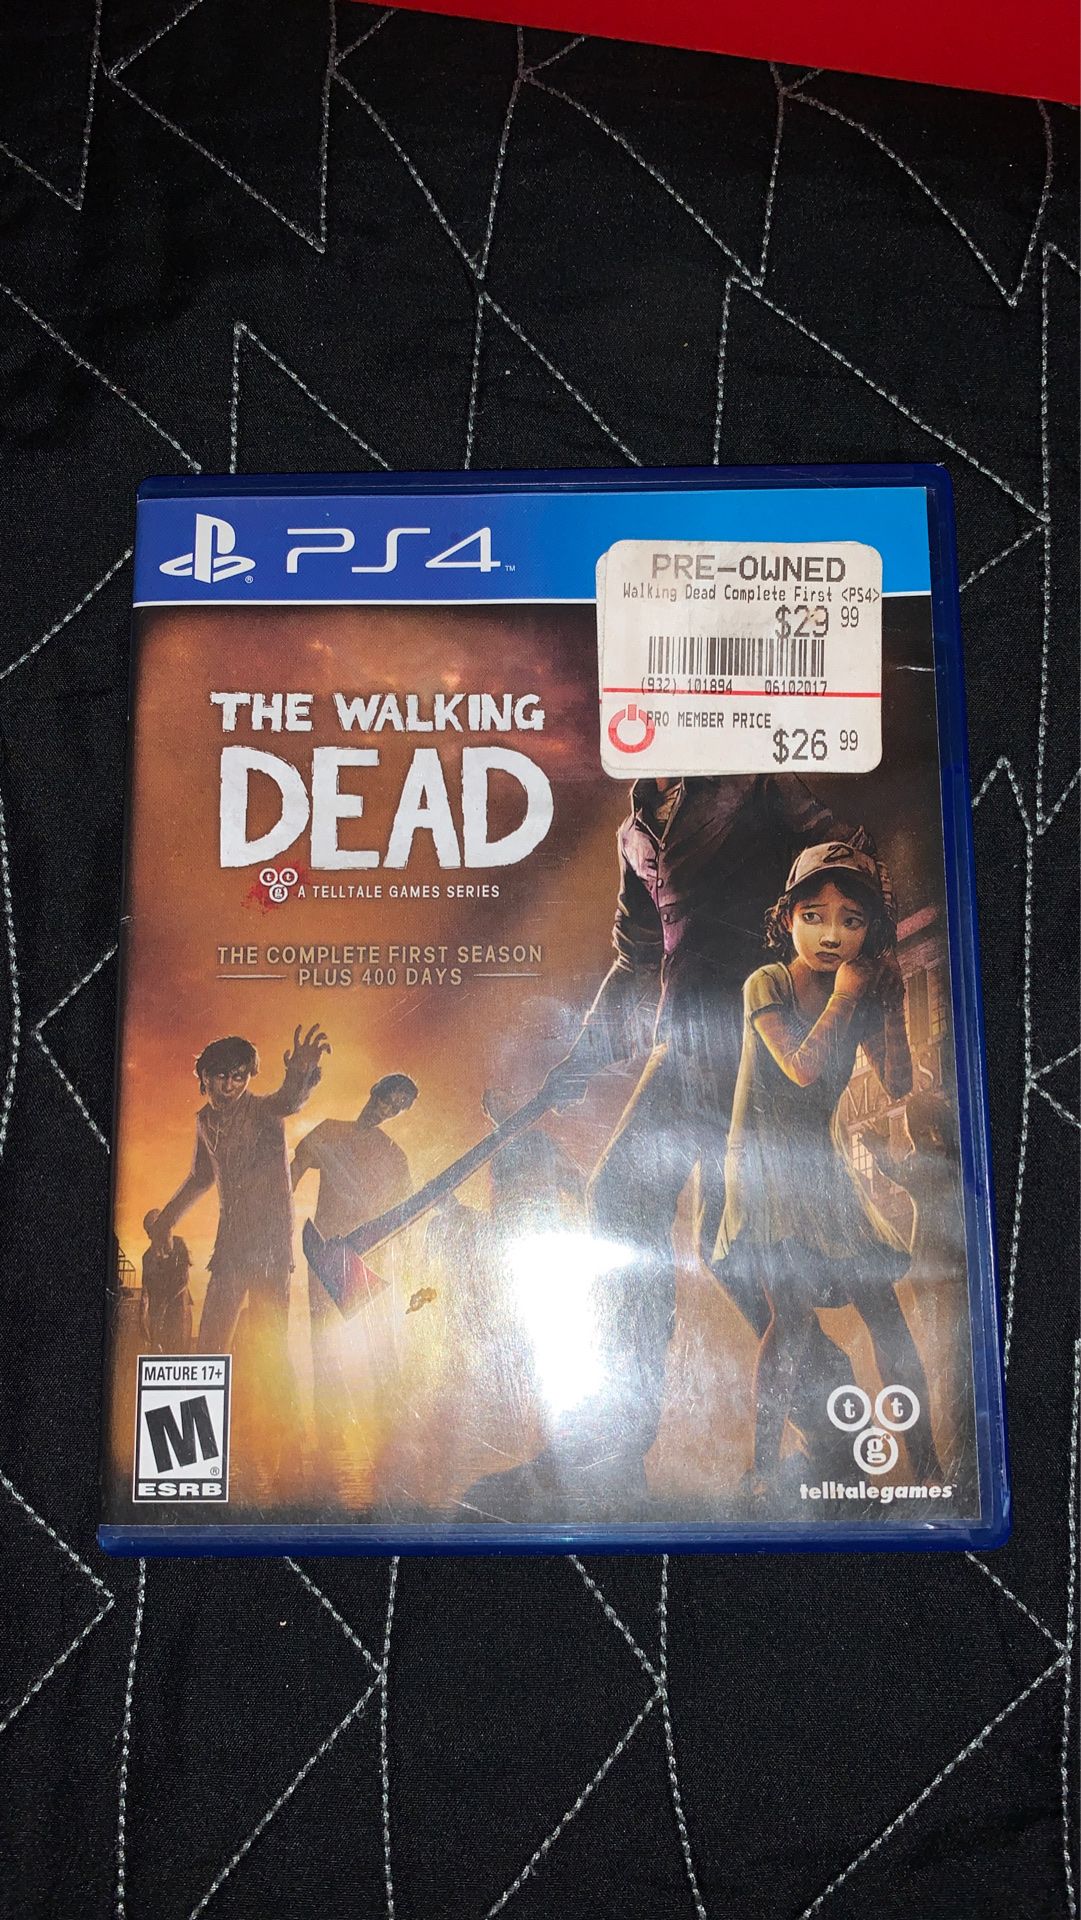 The Walking Dead PS4 game